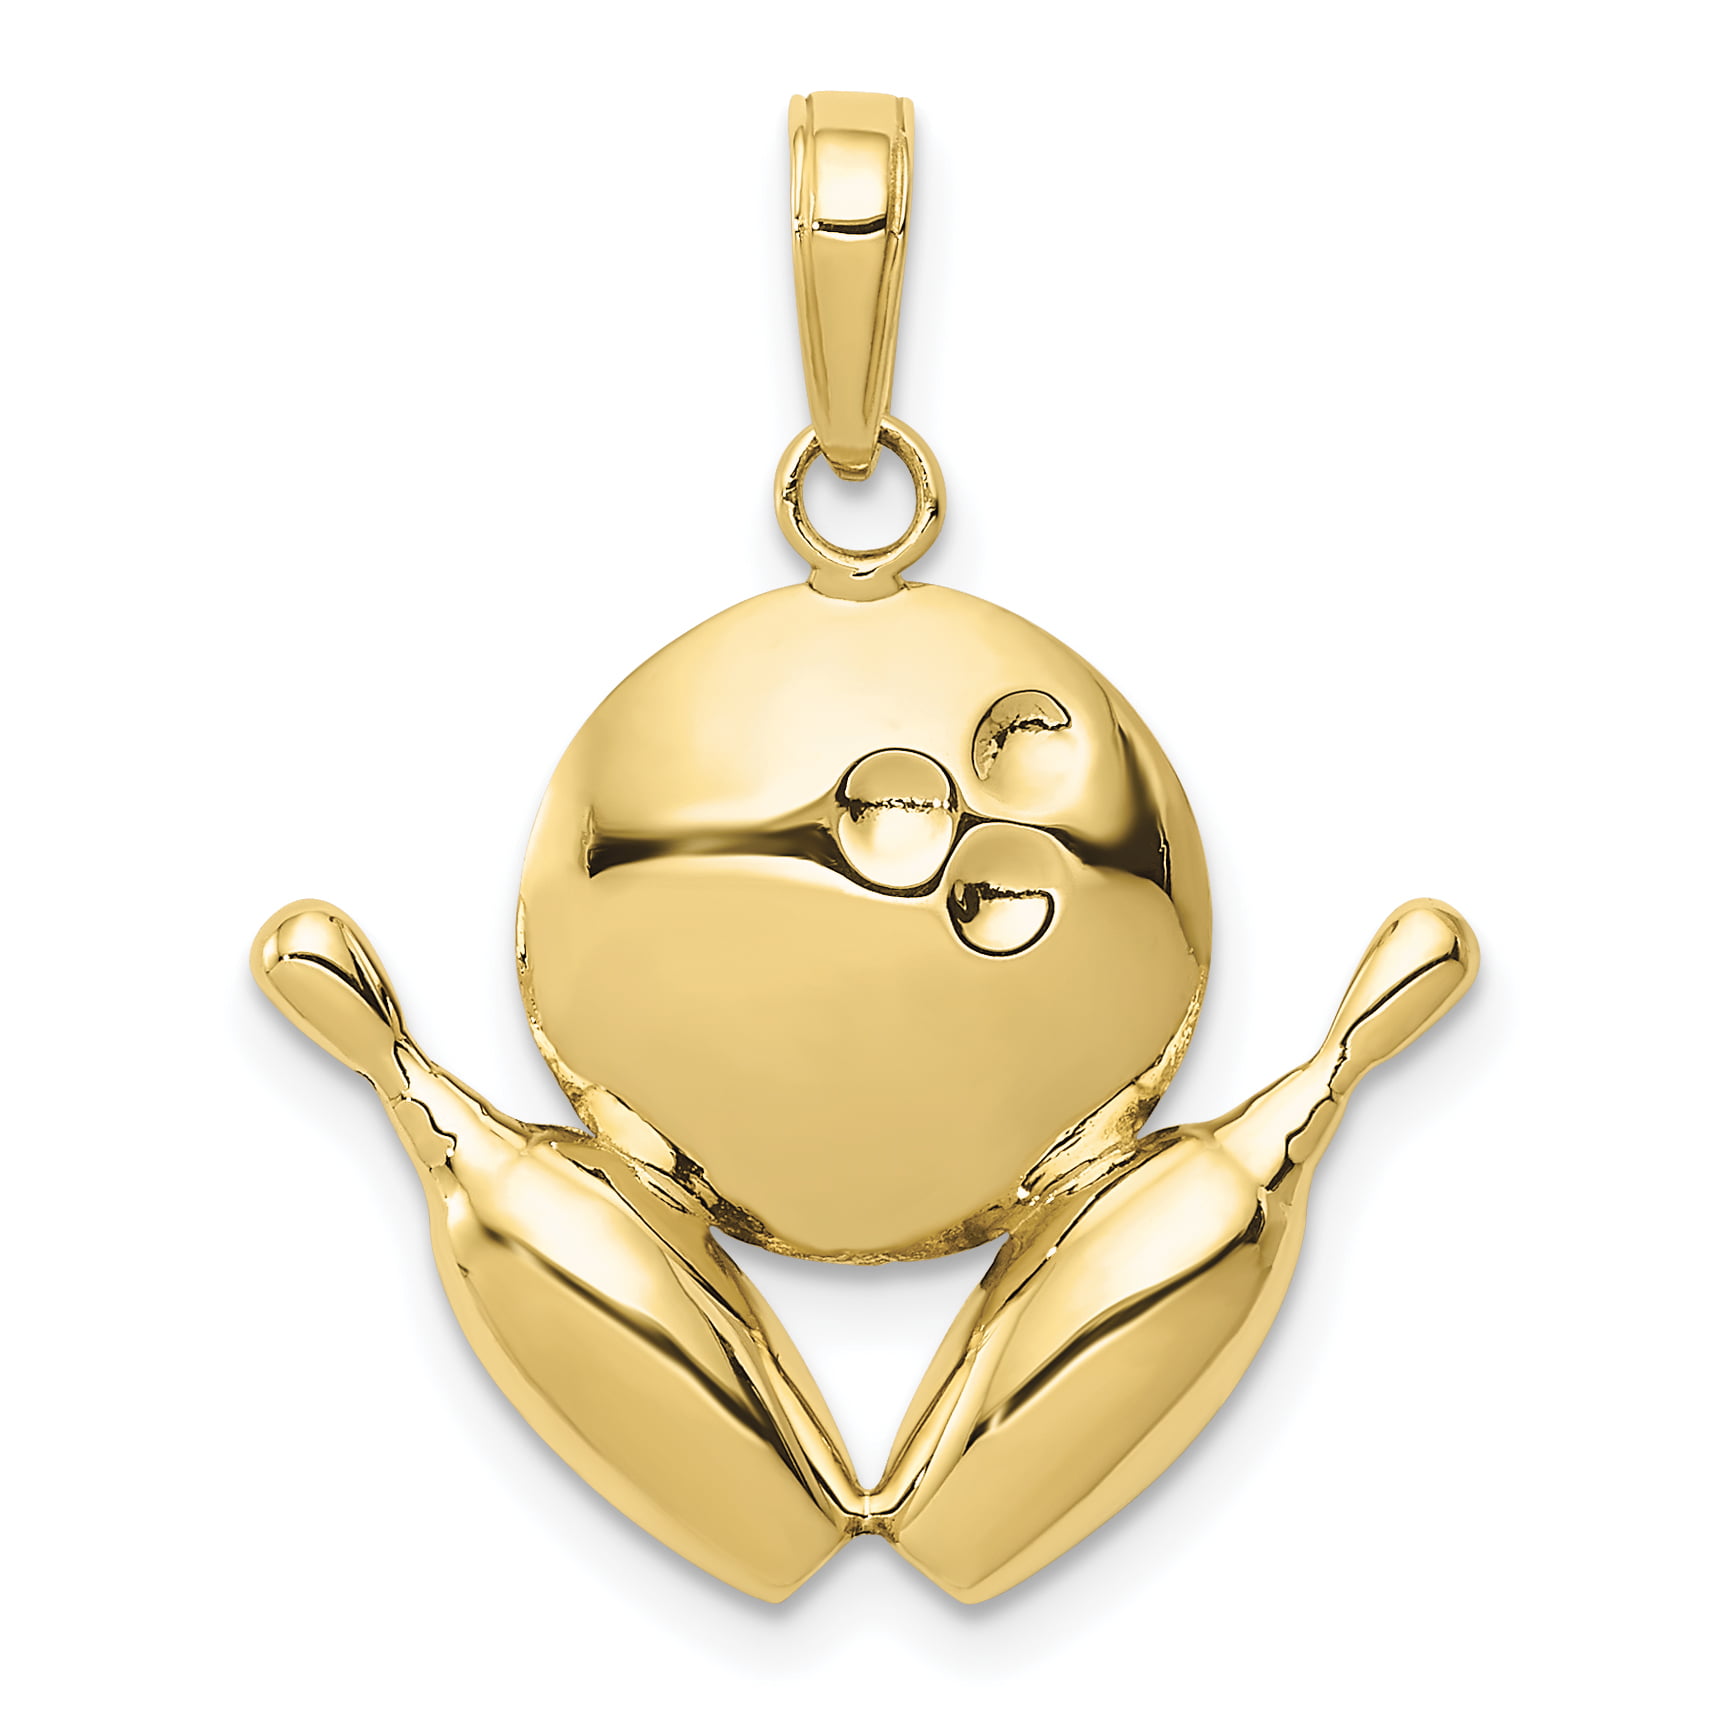 Details about   .925 Sterling Silver Antiqued Bowling Ball and Pins Charm Pendant MSRP $31 